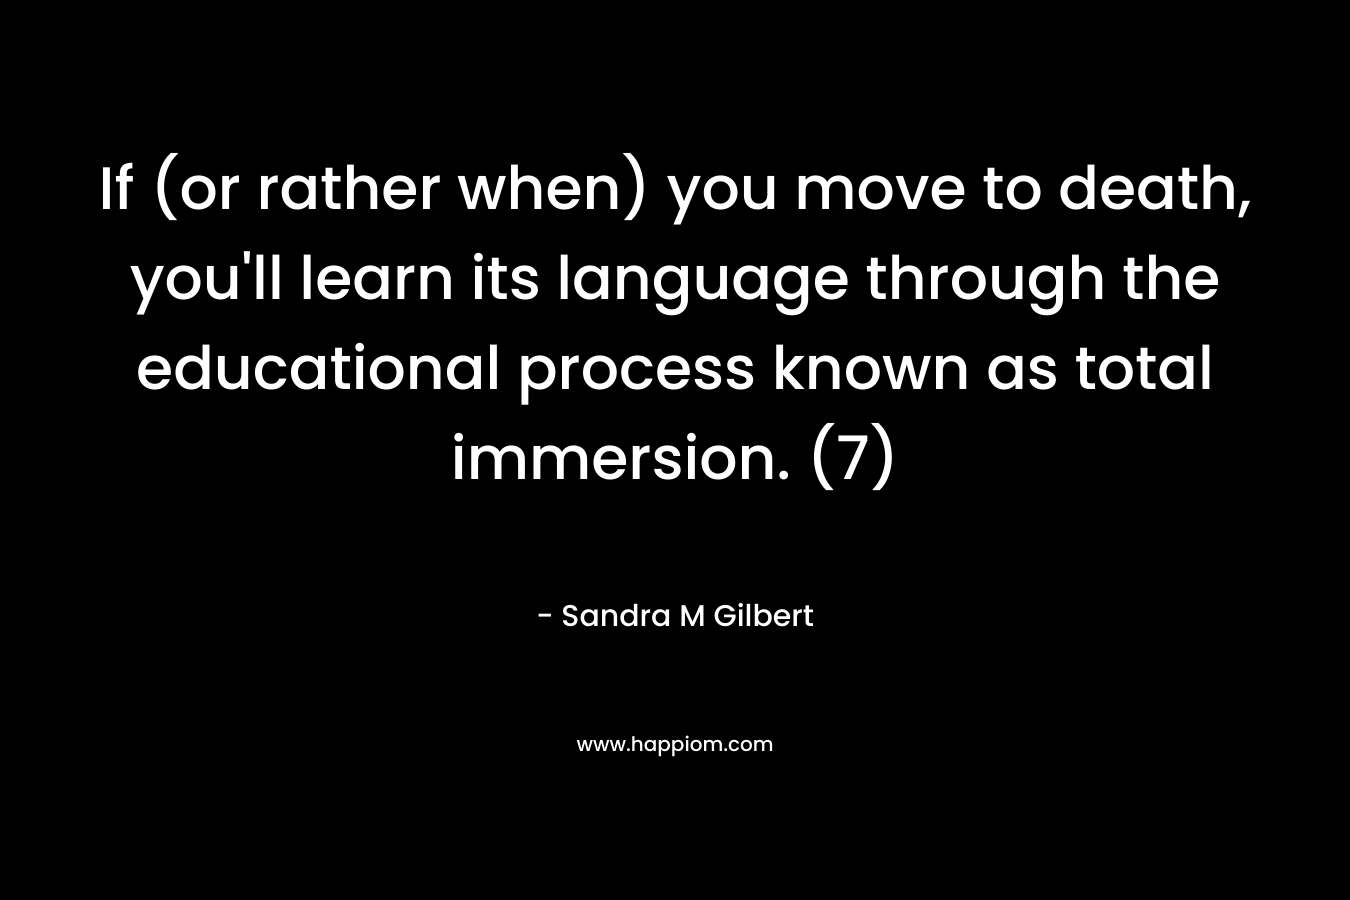 If (or rather when) you move to death, you’ll learn its language through the educational process known as total immersion. (7) – Sandra M Gilbert